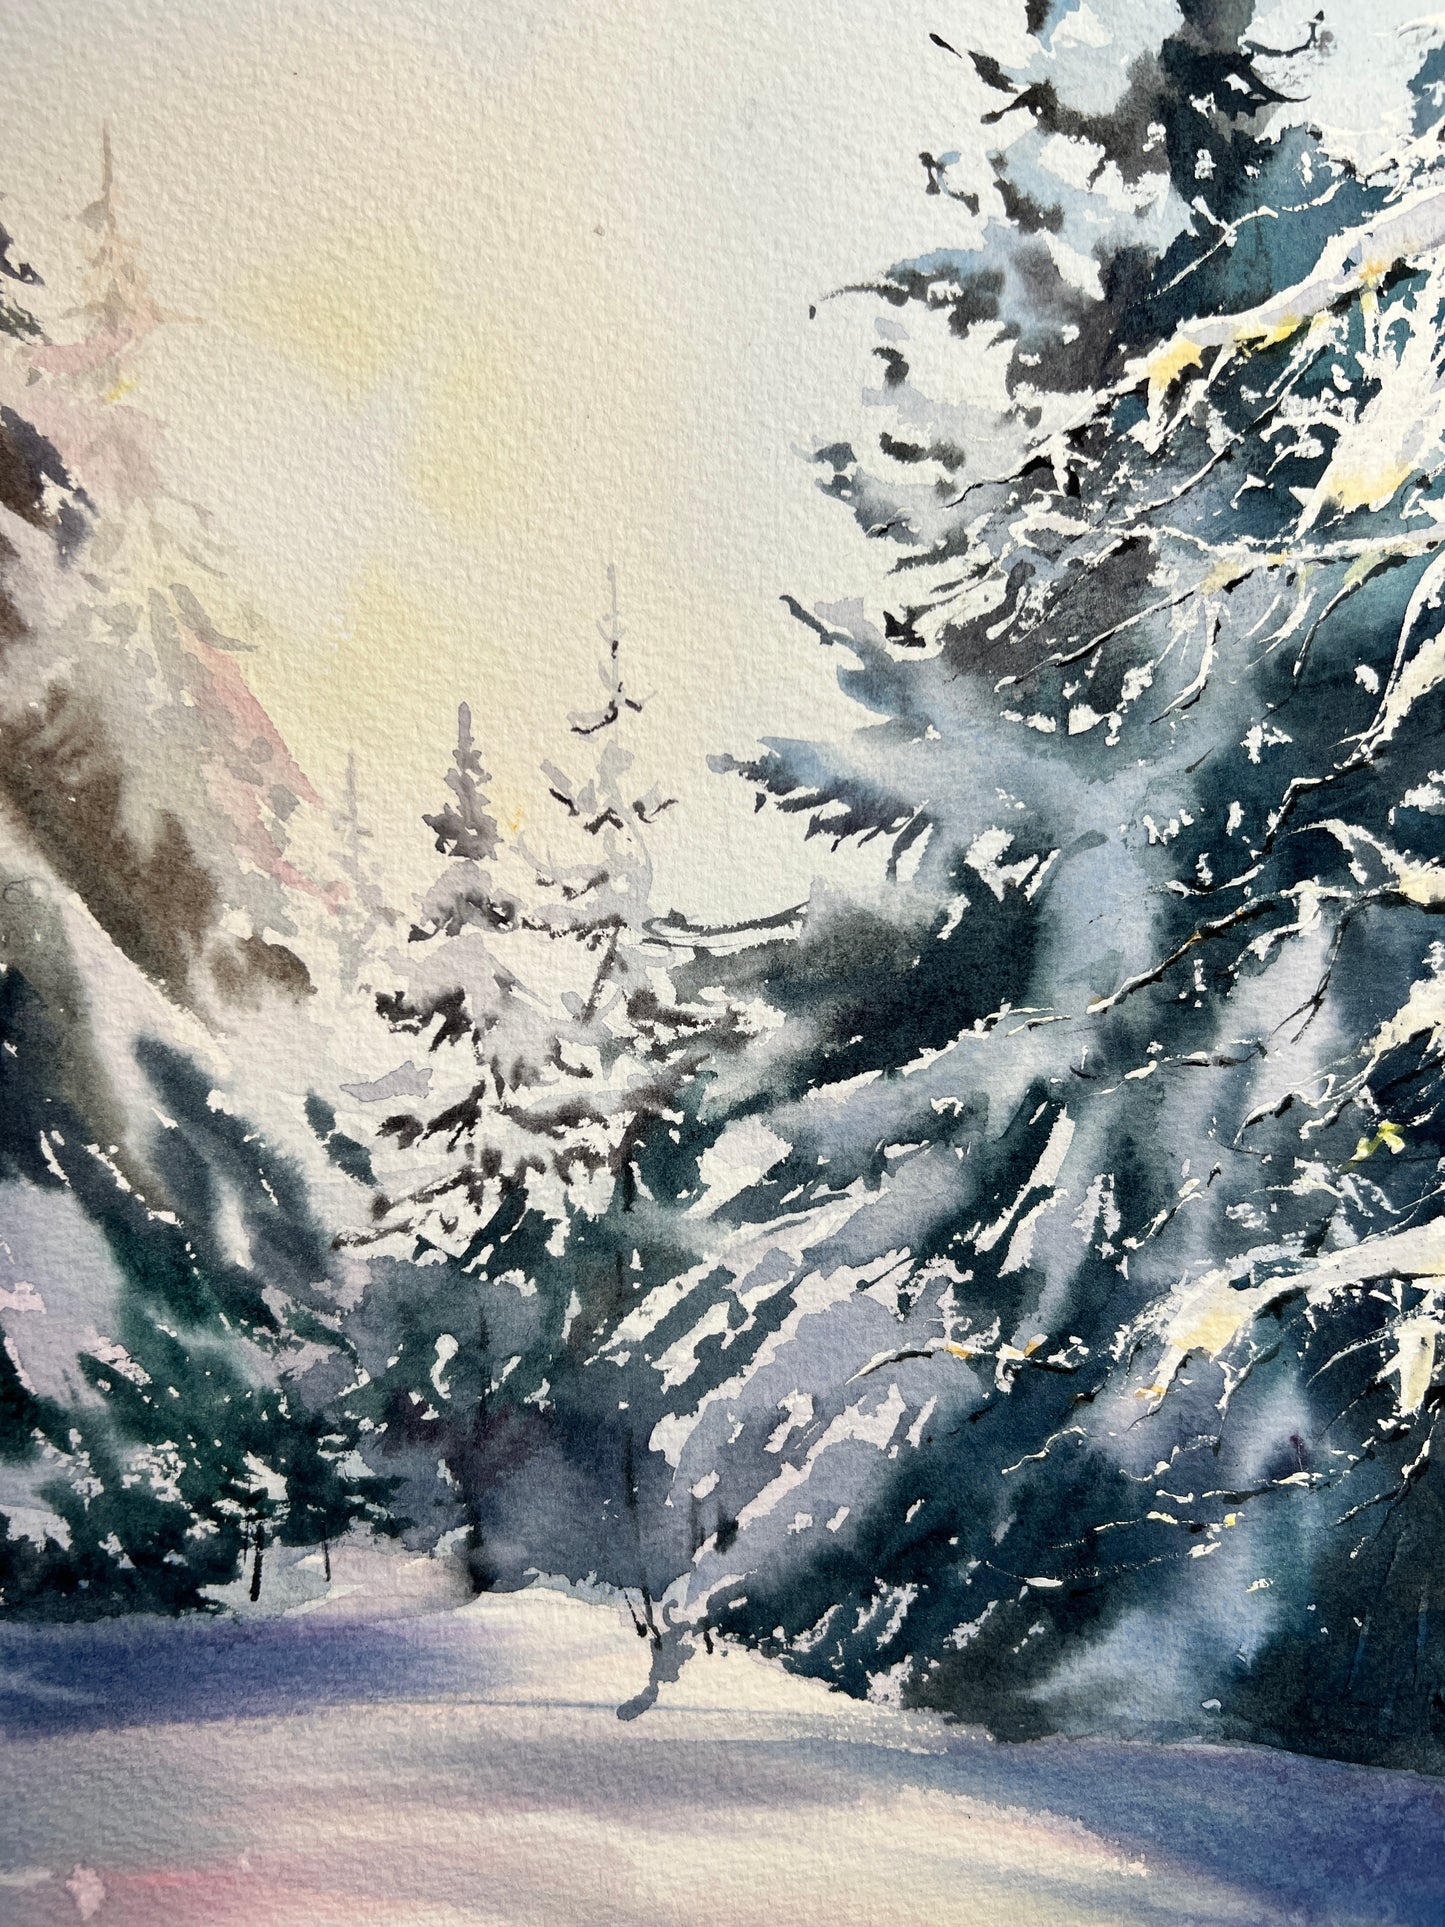 Winter Forest Small Painting, Christmas Tree Watercolor Original Art, New Year Gift & Art Decor, Snowy Landscape